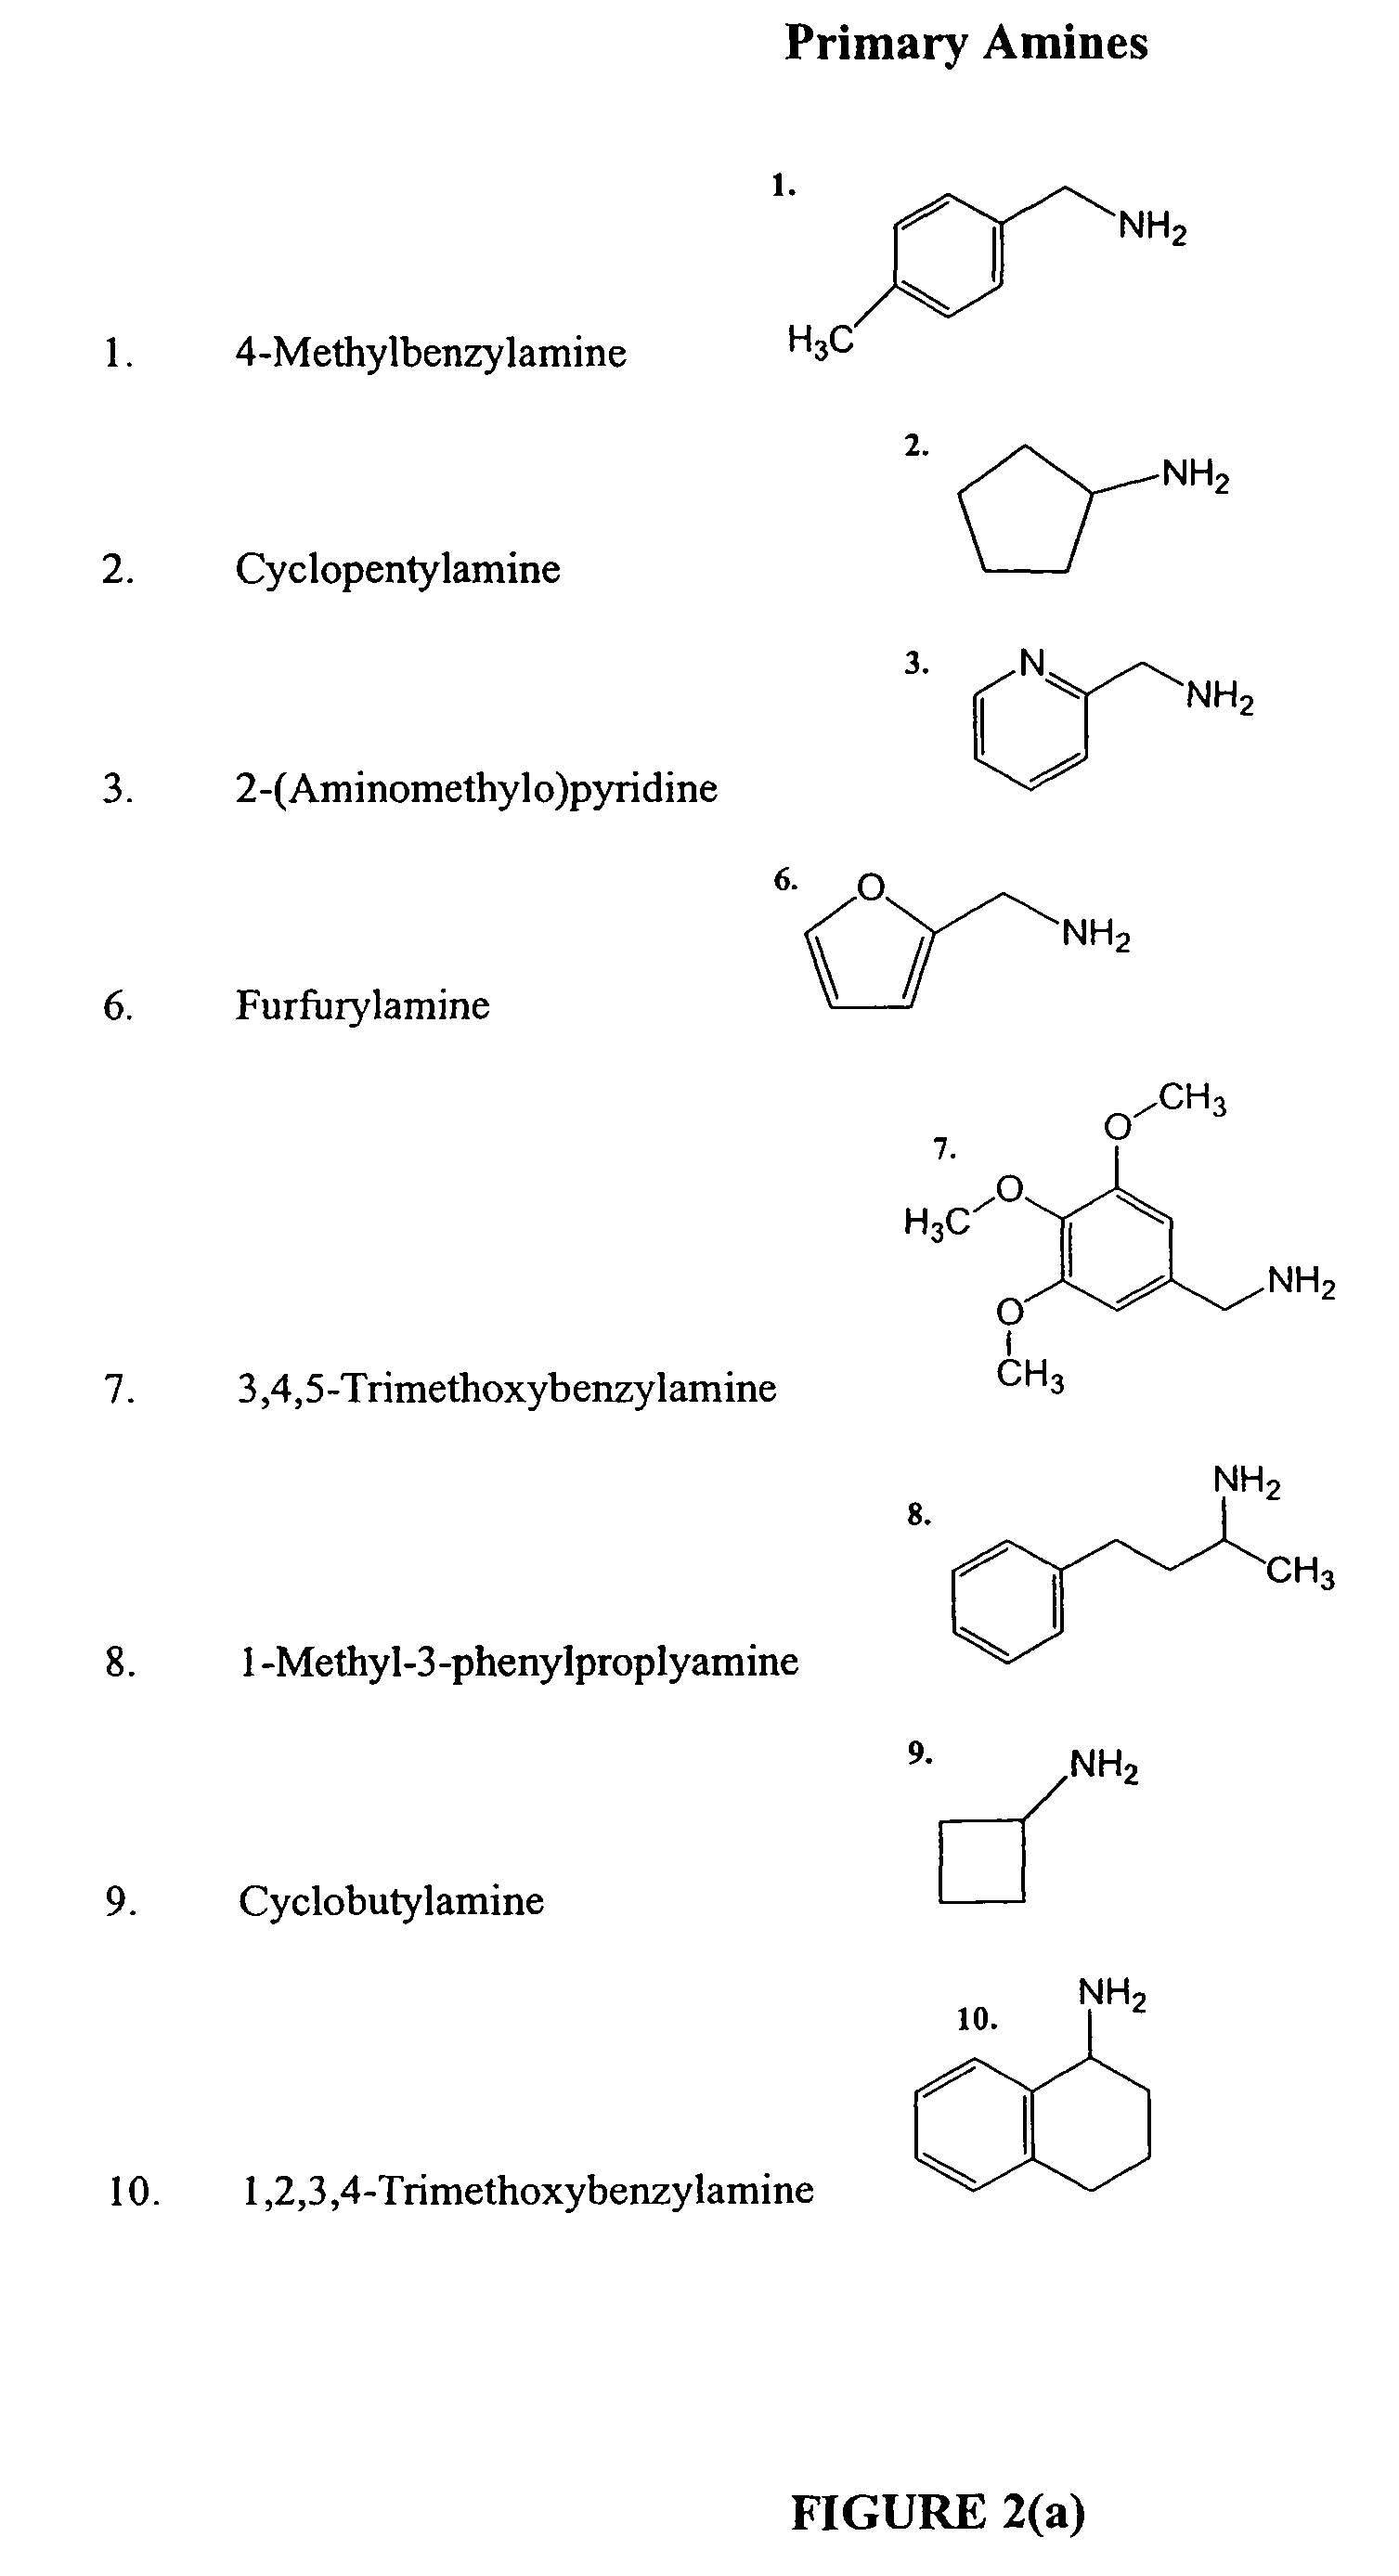 Anti tubercular drug: compositions and methods